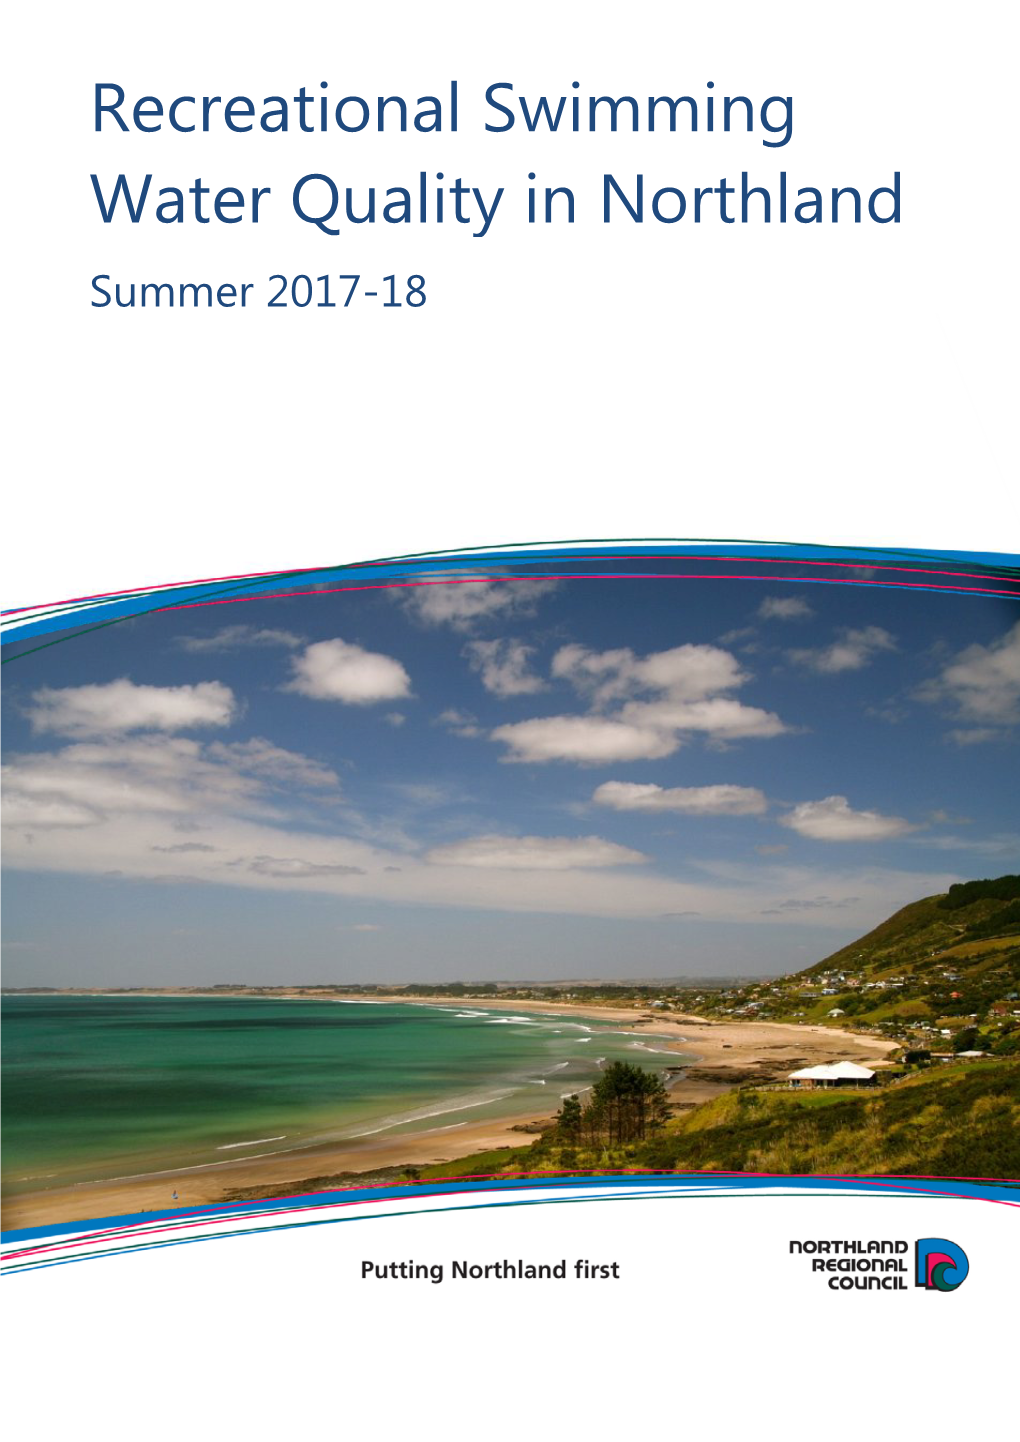 Recreational Swimming Water Quality in Northland